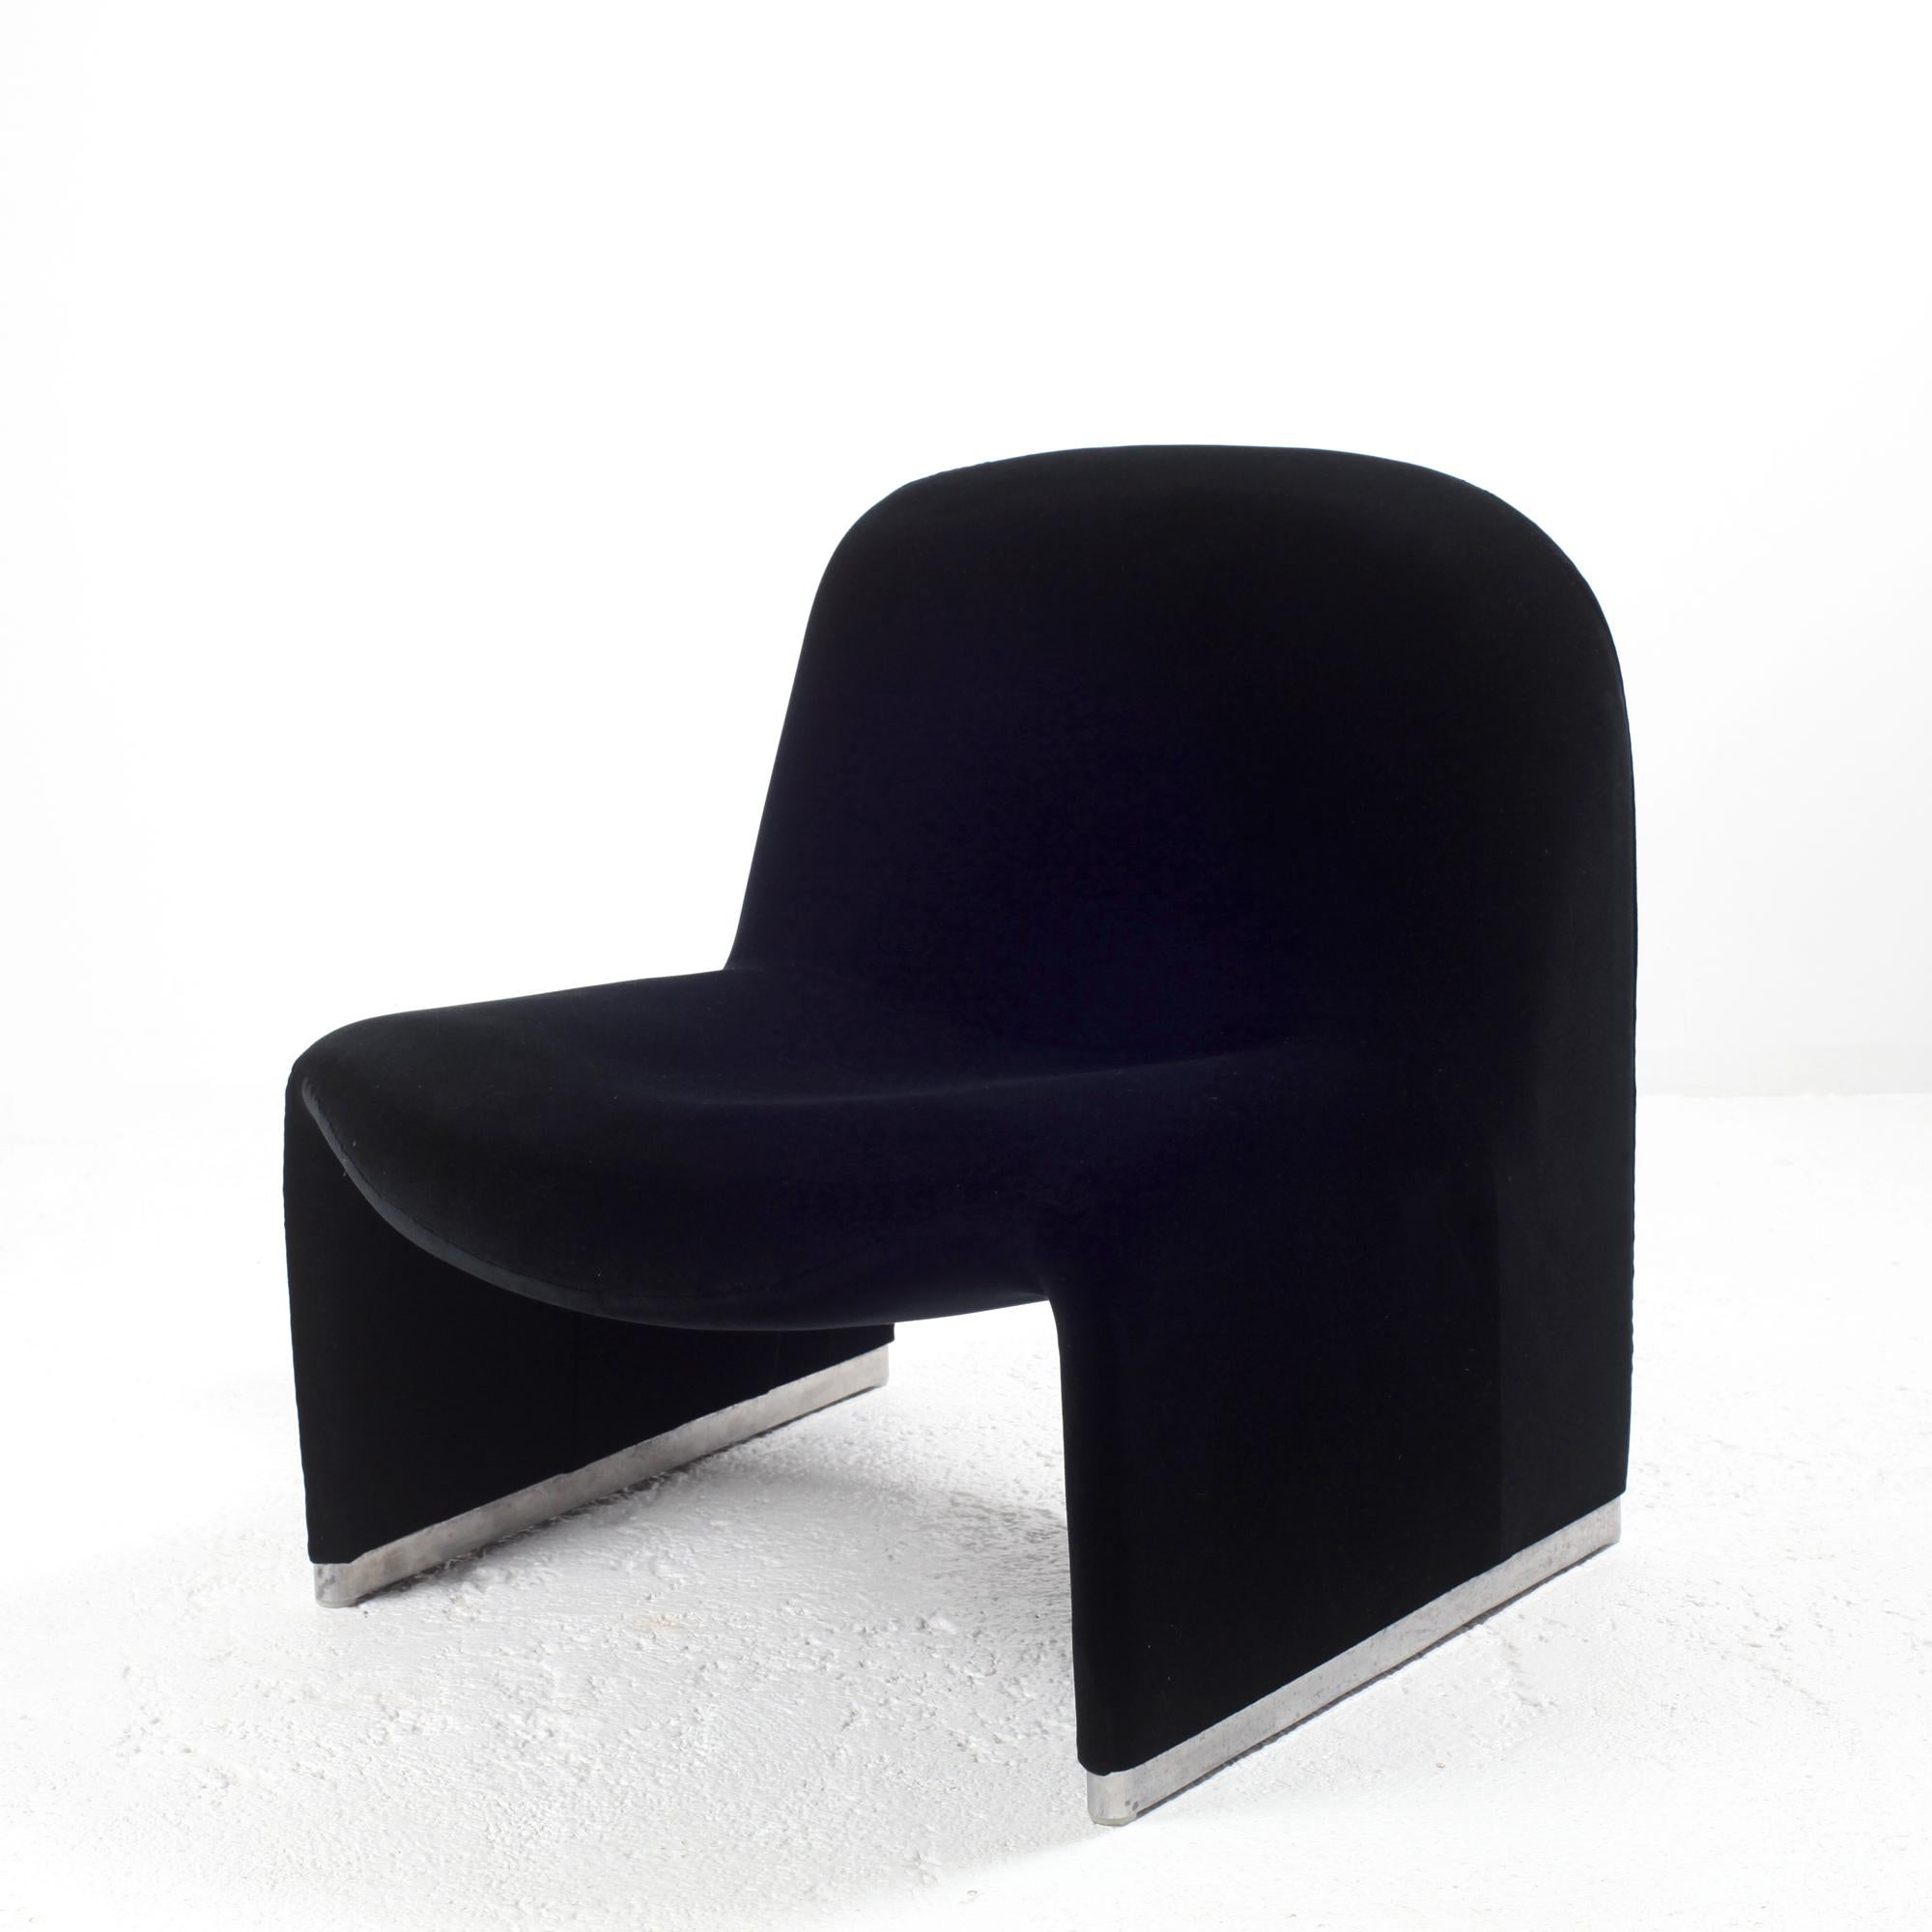 Iconic 'Alky' lounge chair newly reupholstered in black velvet
Designed by Giancarlo Piretti for Anonima Castelli in the late 60s. These lounges are known for their comfortable seating and iconic Italian design with nice clear line.